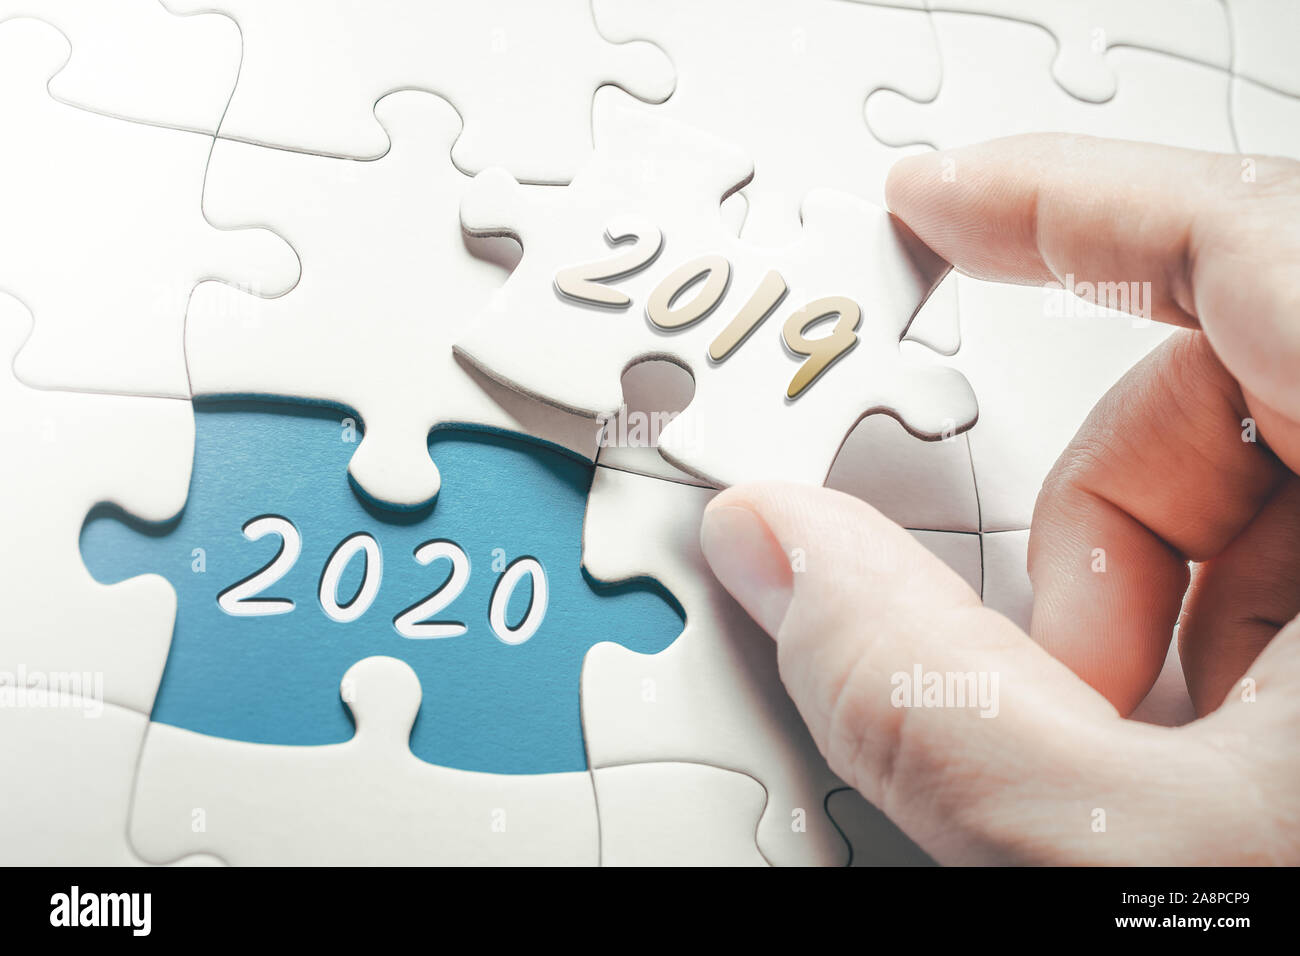 The Years 2019 And 2020 In Missing Piece Jigsaw Puzzle Stock Photo